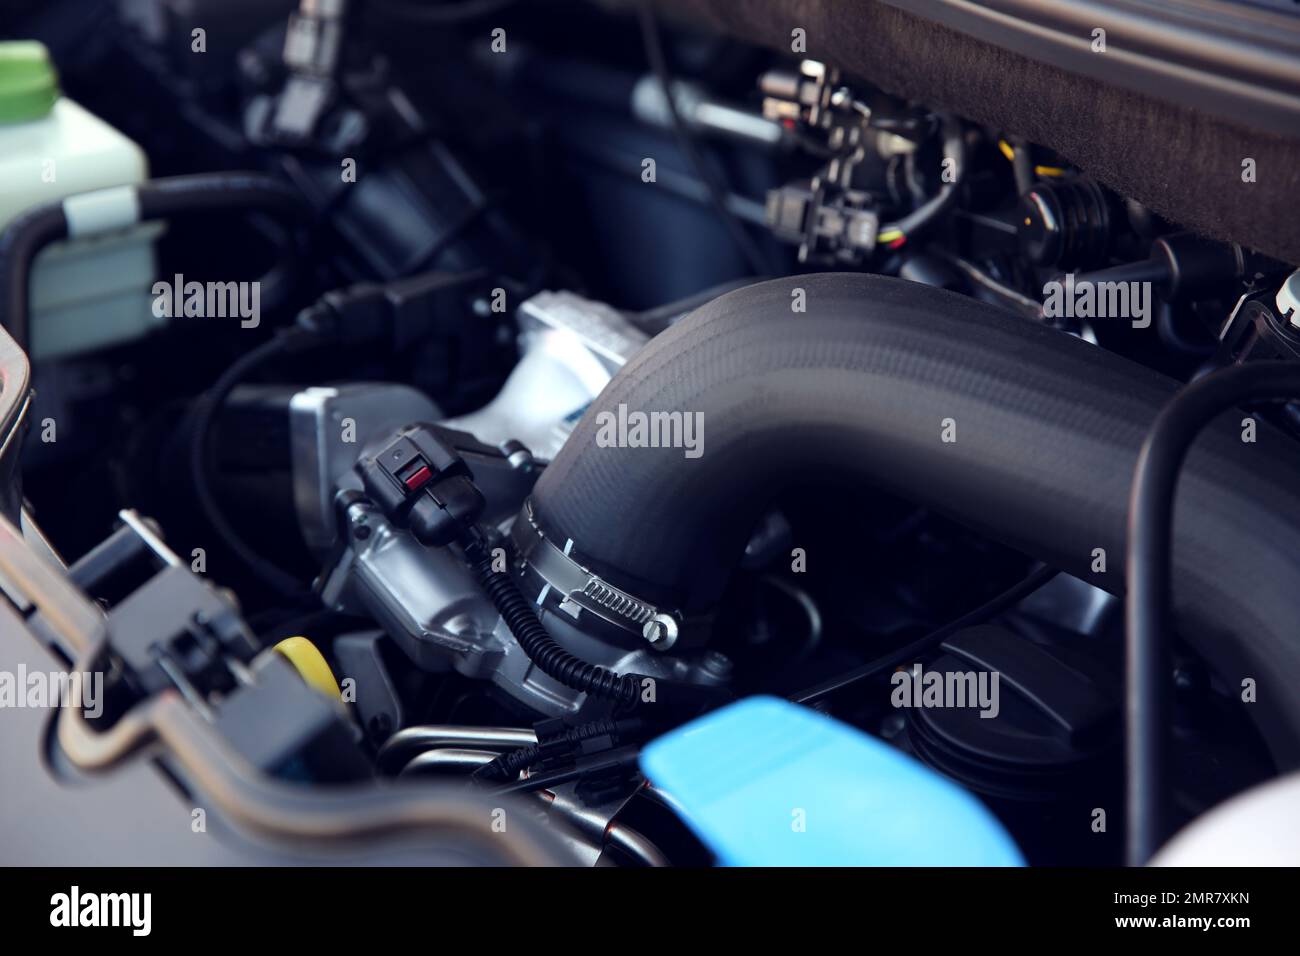 Closeup view of engine bay in modern car Stock Photo